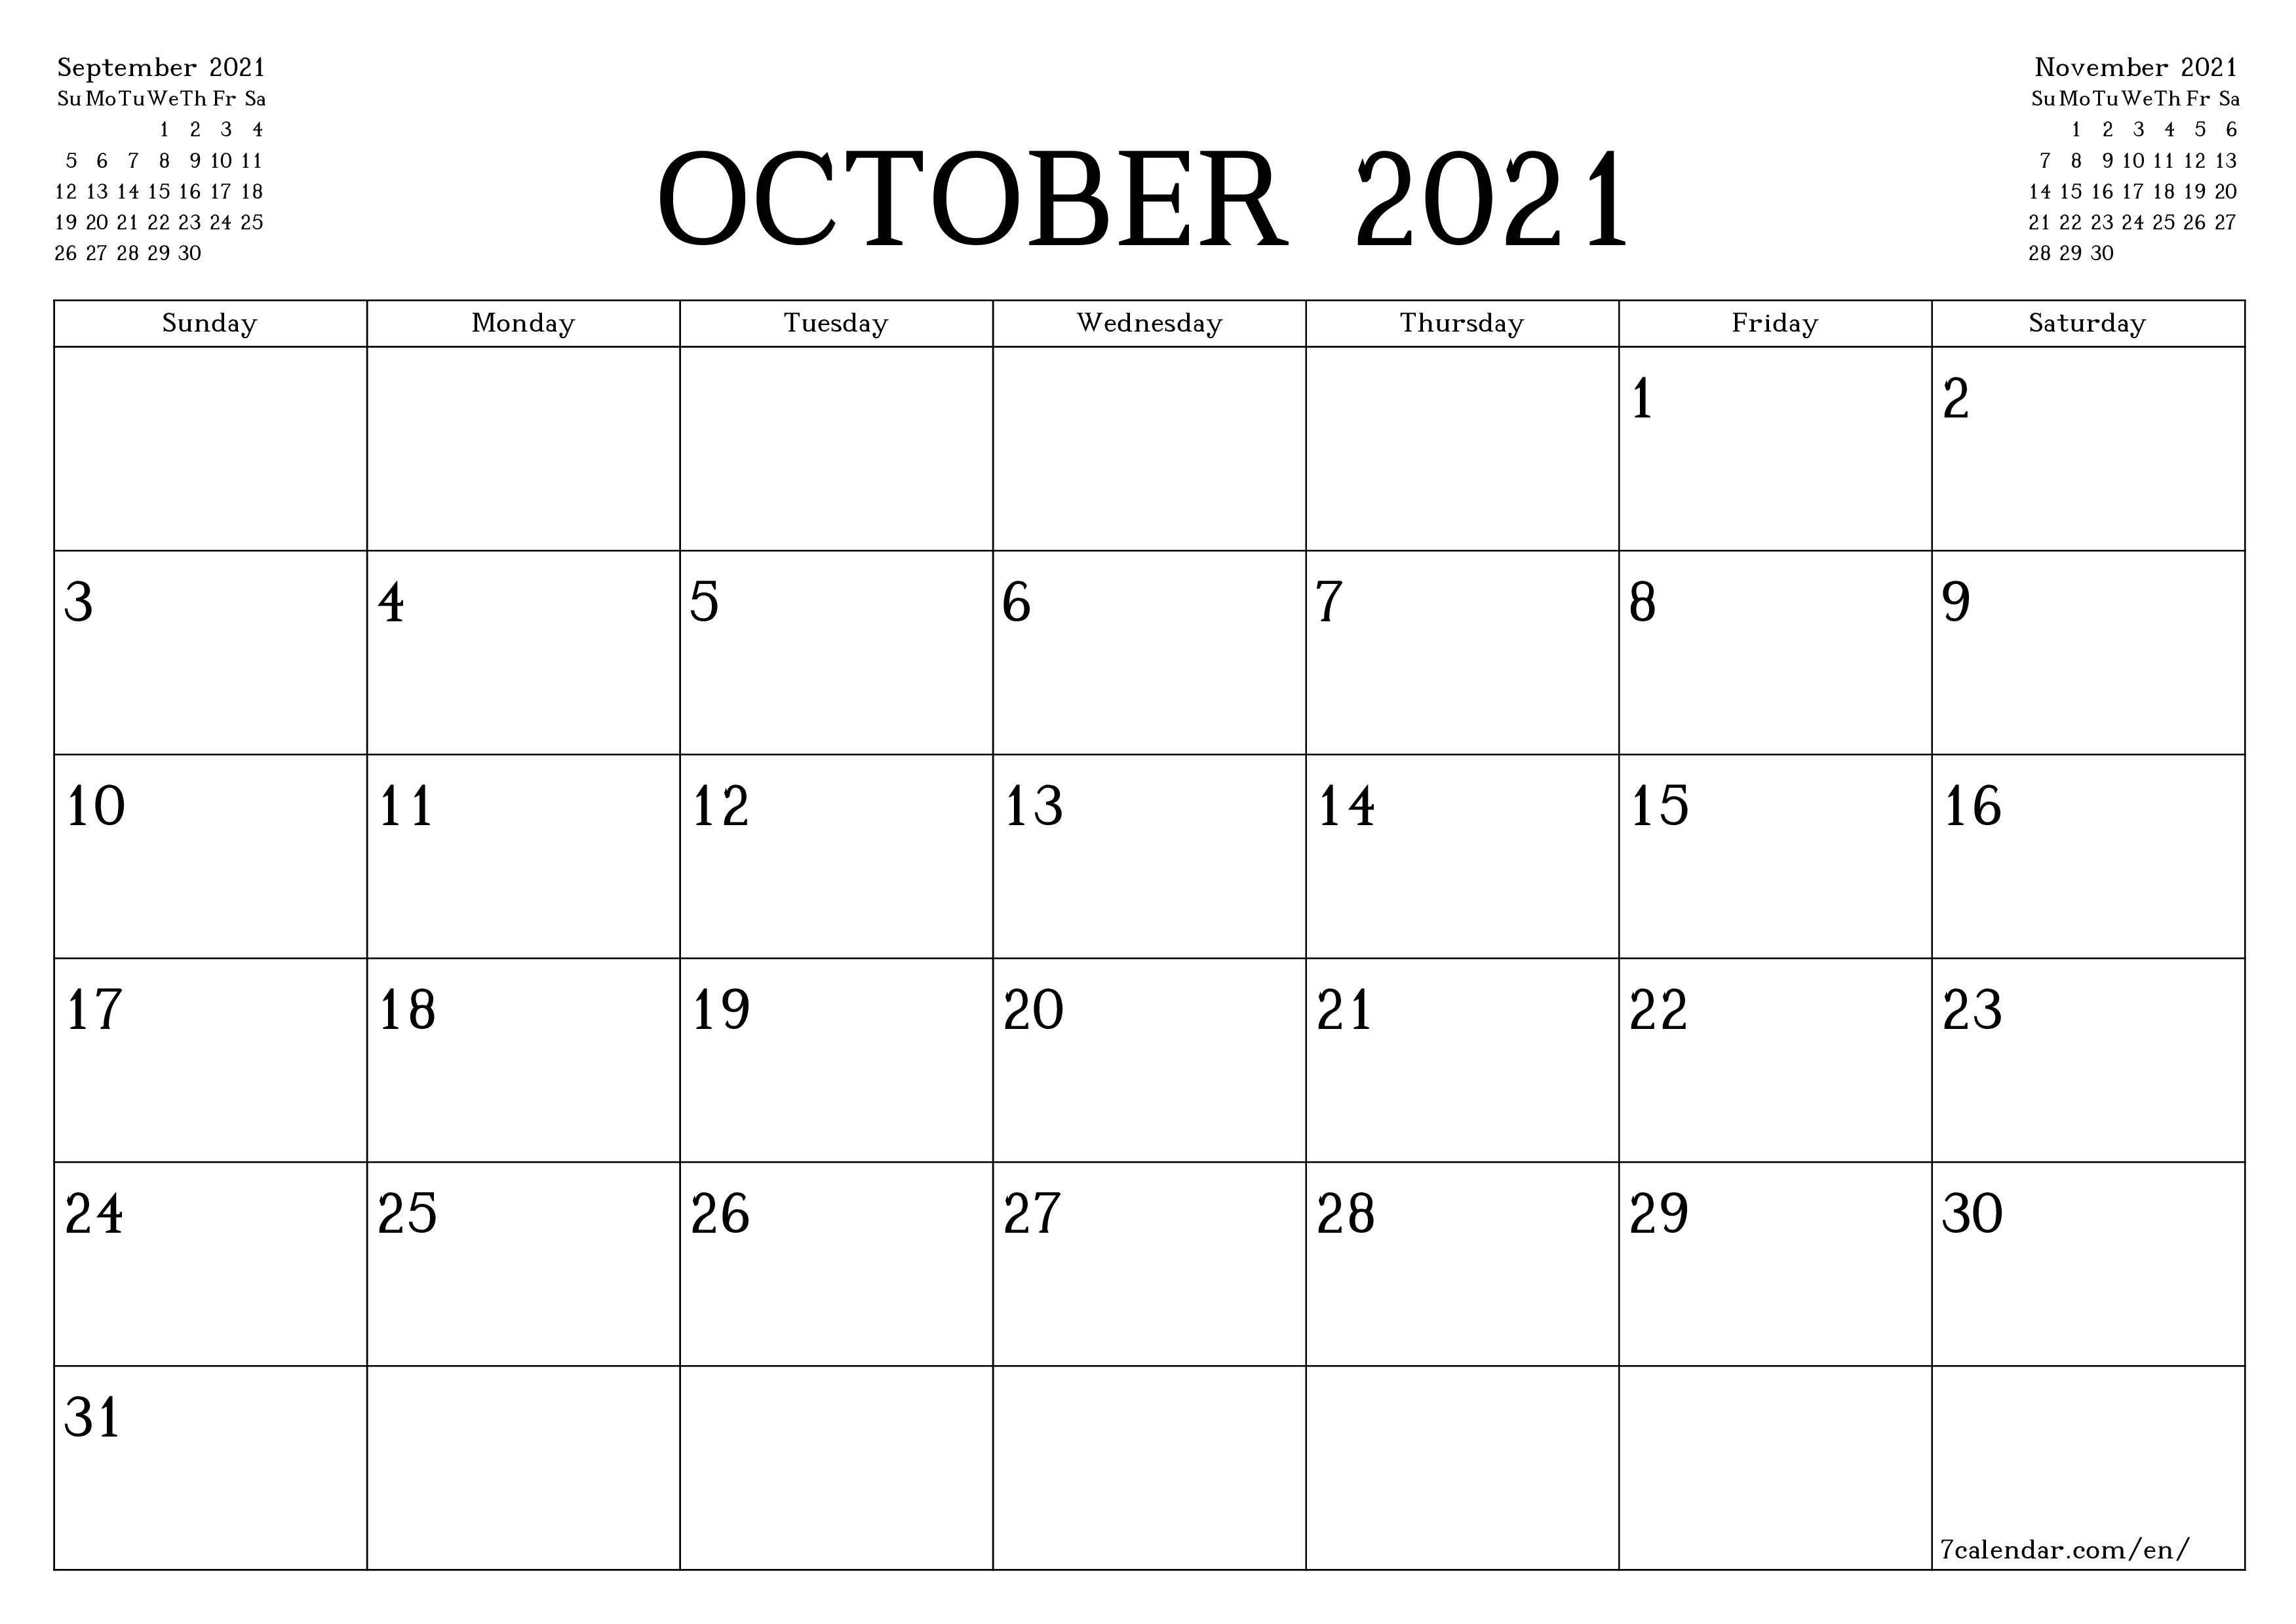 Blank monthly printable calendar and planner for month October 2021 with notes save and print to PDF PNG English - 7calendar.com